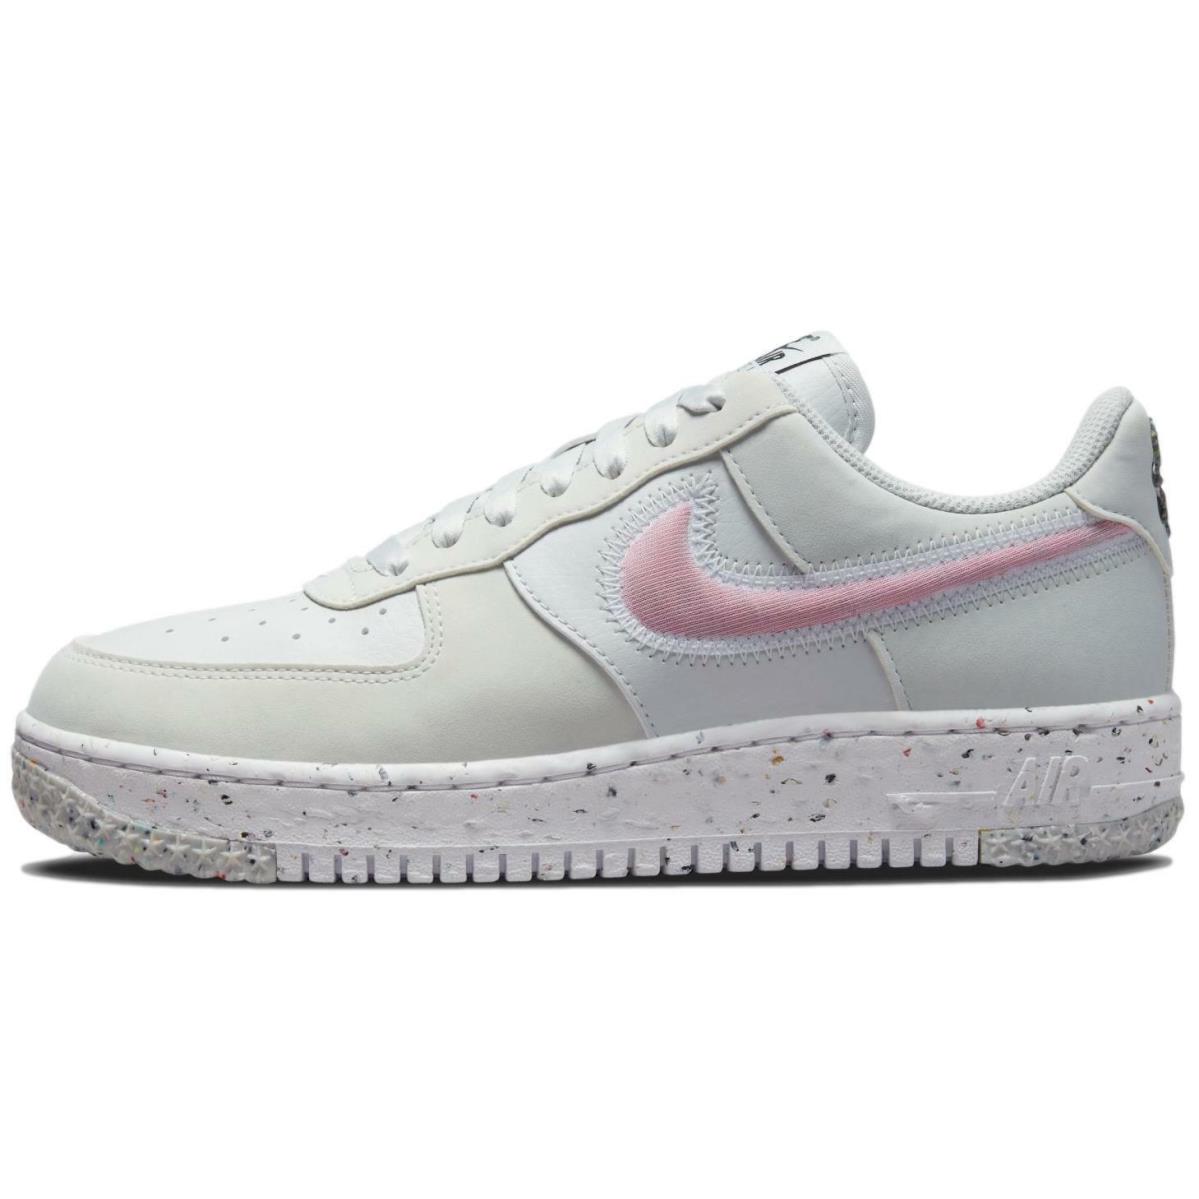 Nike shoes Air Force - Photon Dust/Rush Pink 0